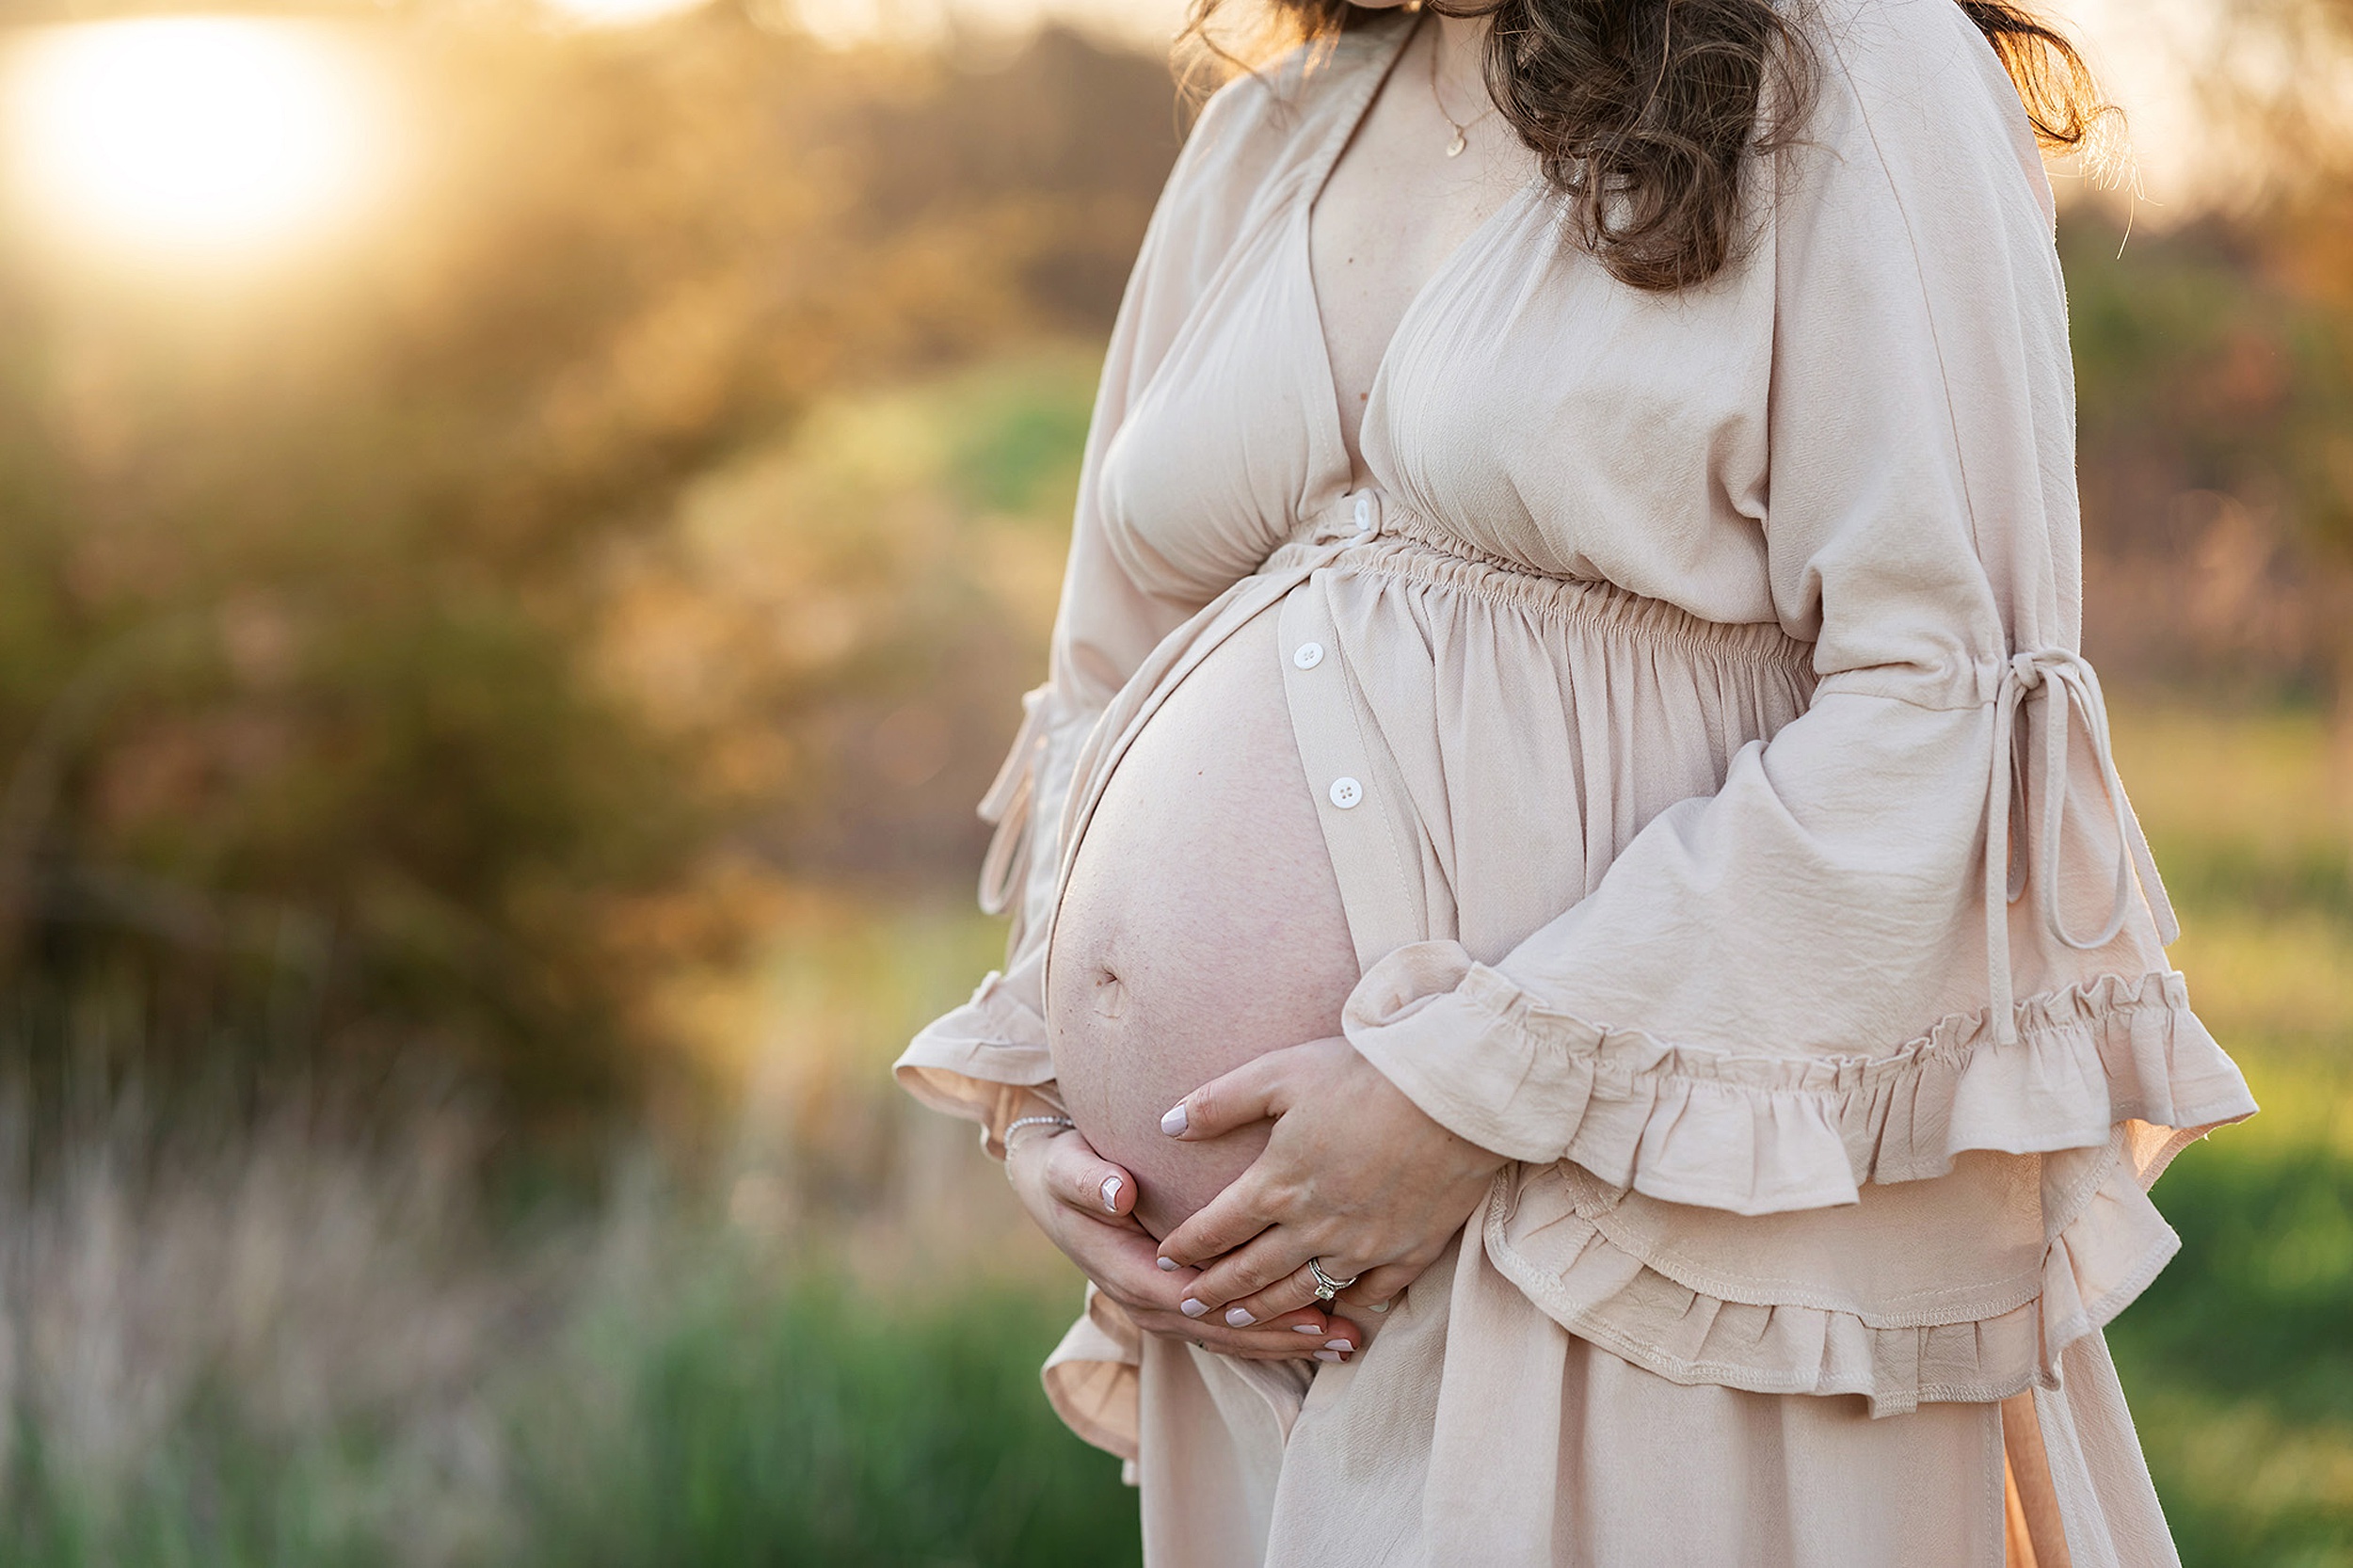 A mom to be opens her dress to hold her bump in a park at sunset after finding midwives in nj